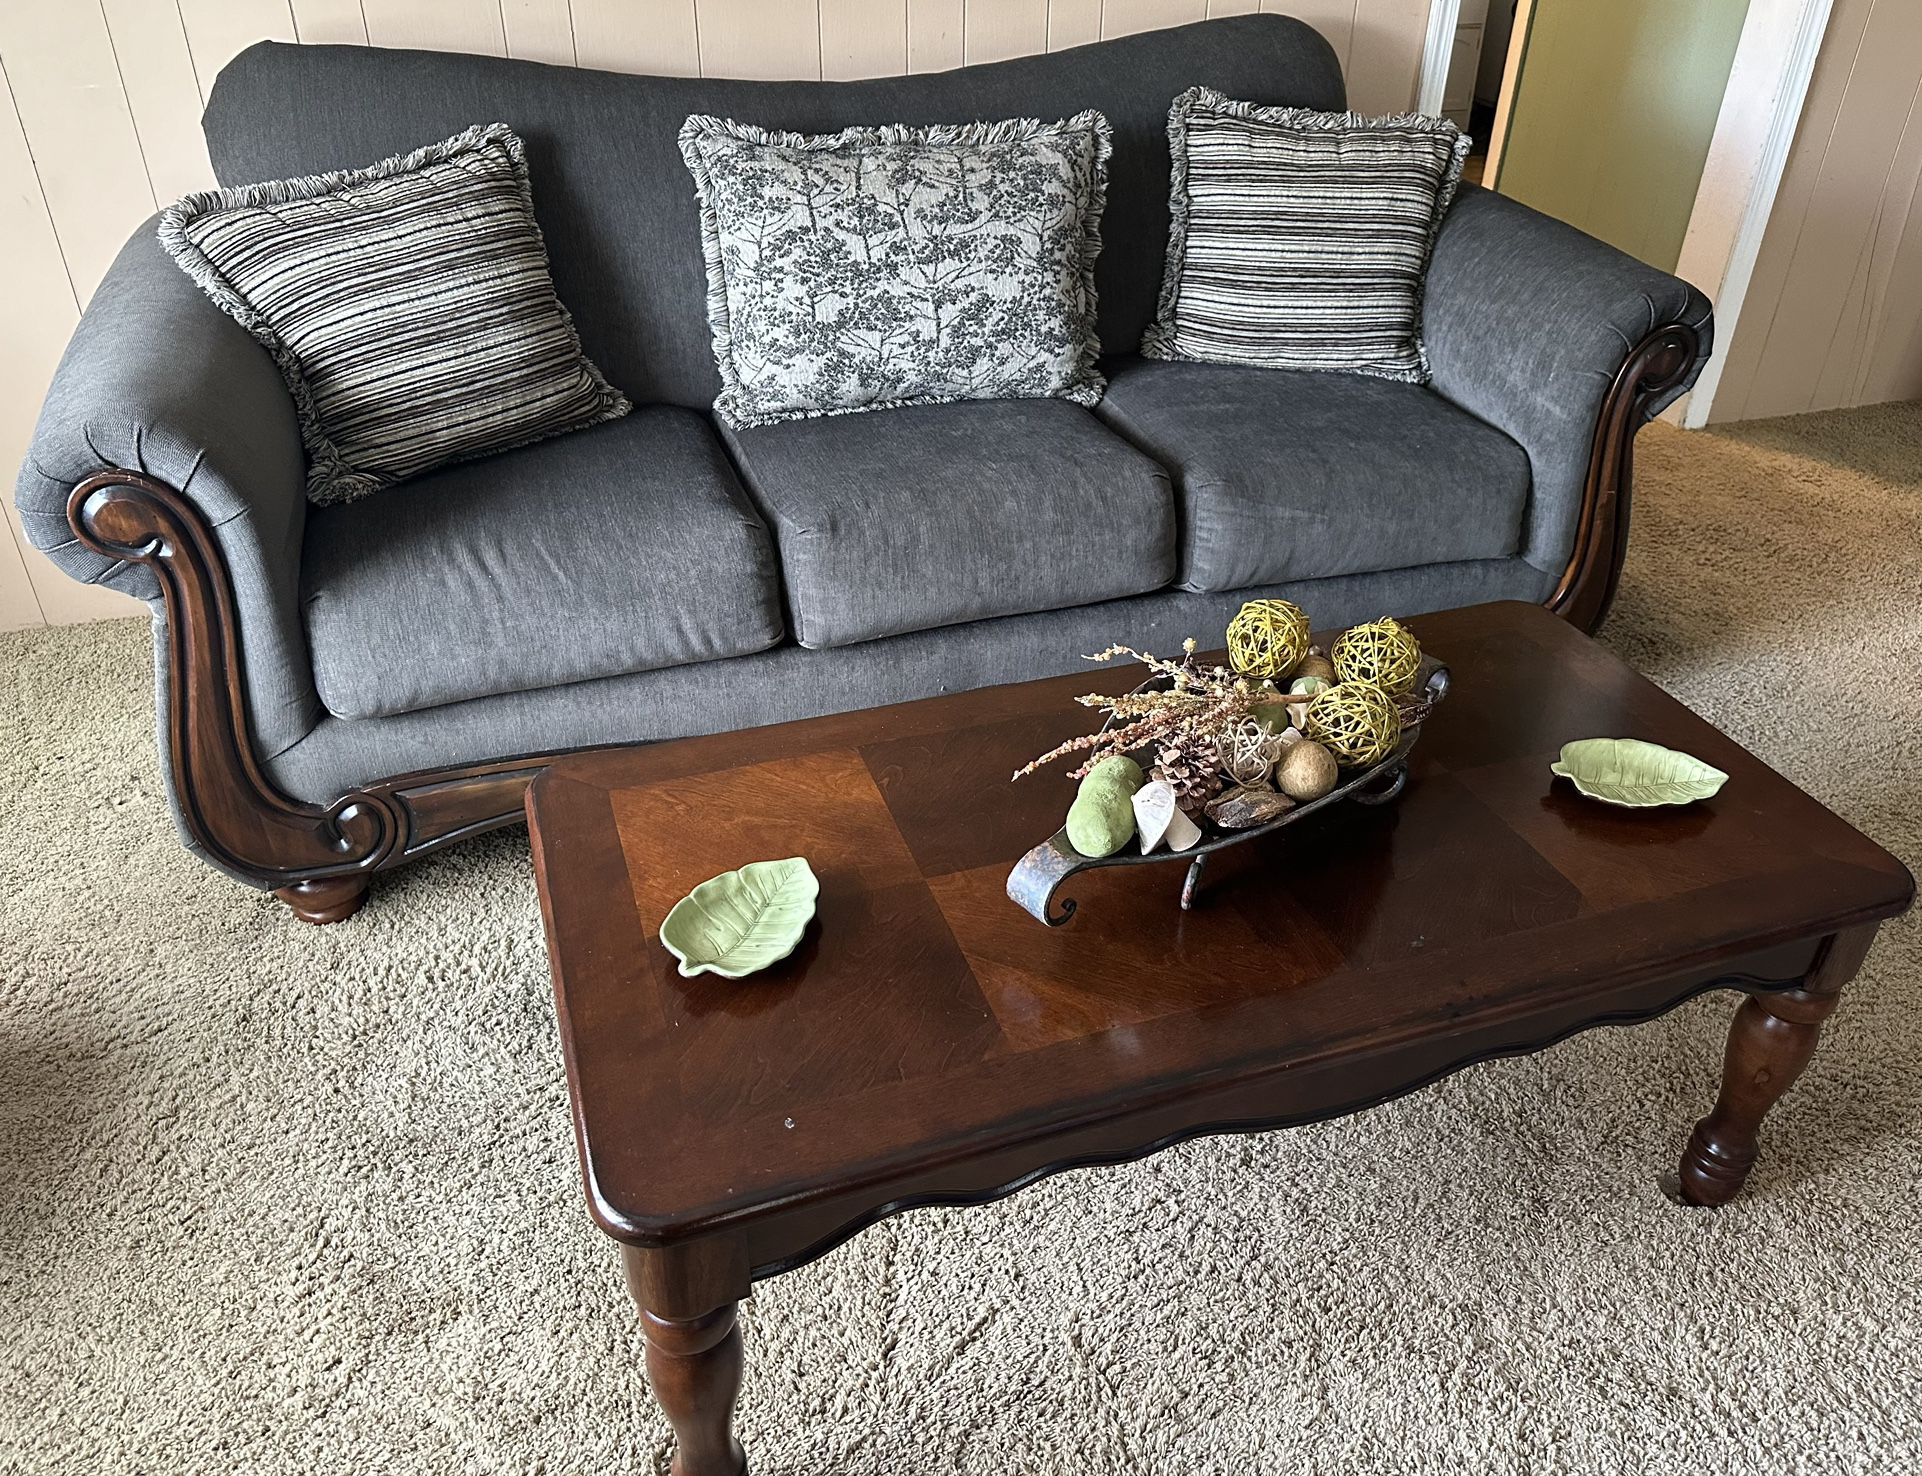 5-piece Barely Used Living Room Set + Lamps